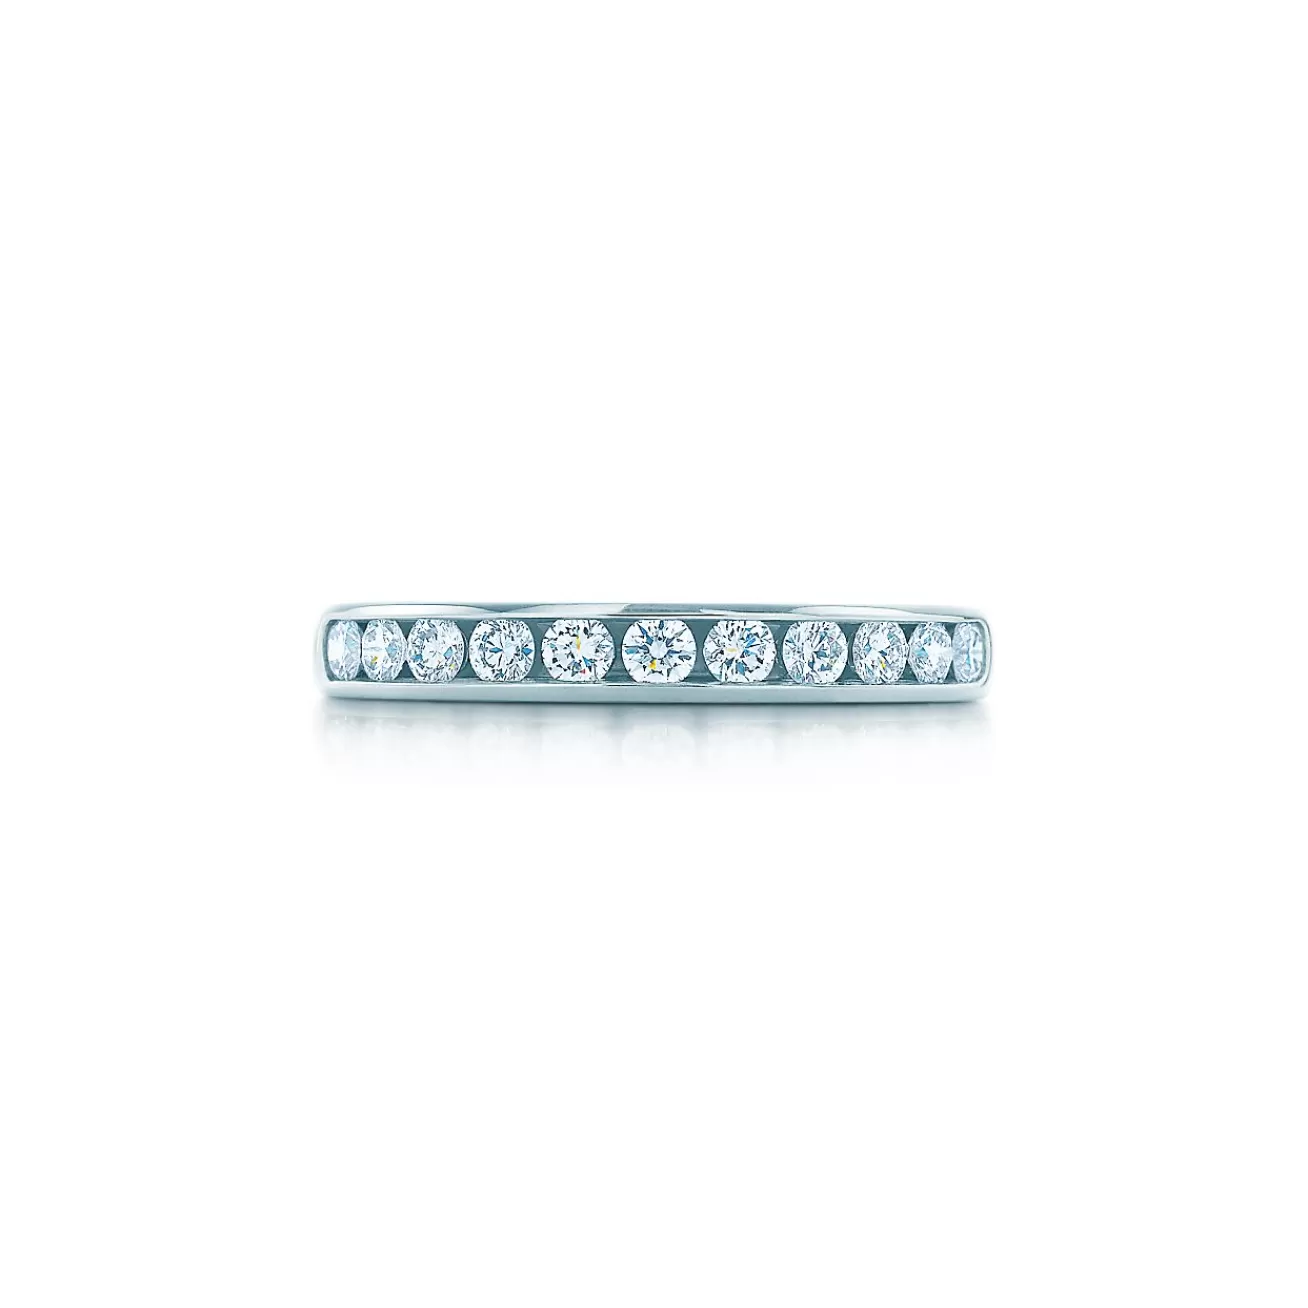 Tiffany & Co. Tiffany® Setting Wedding Band in Platinum with a Half-circle of Diamonds, 3 mm | ^Women Rings | Platinum Jewelry